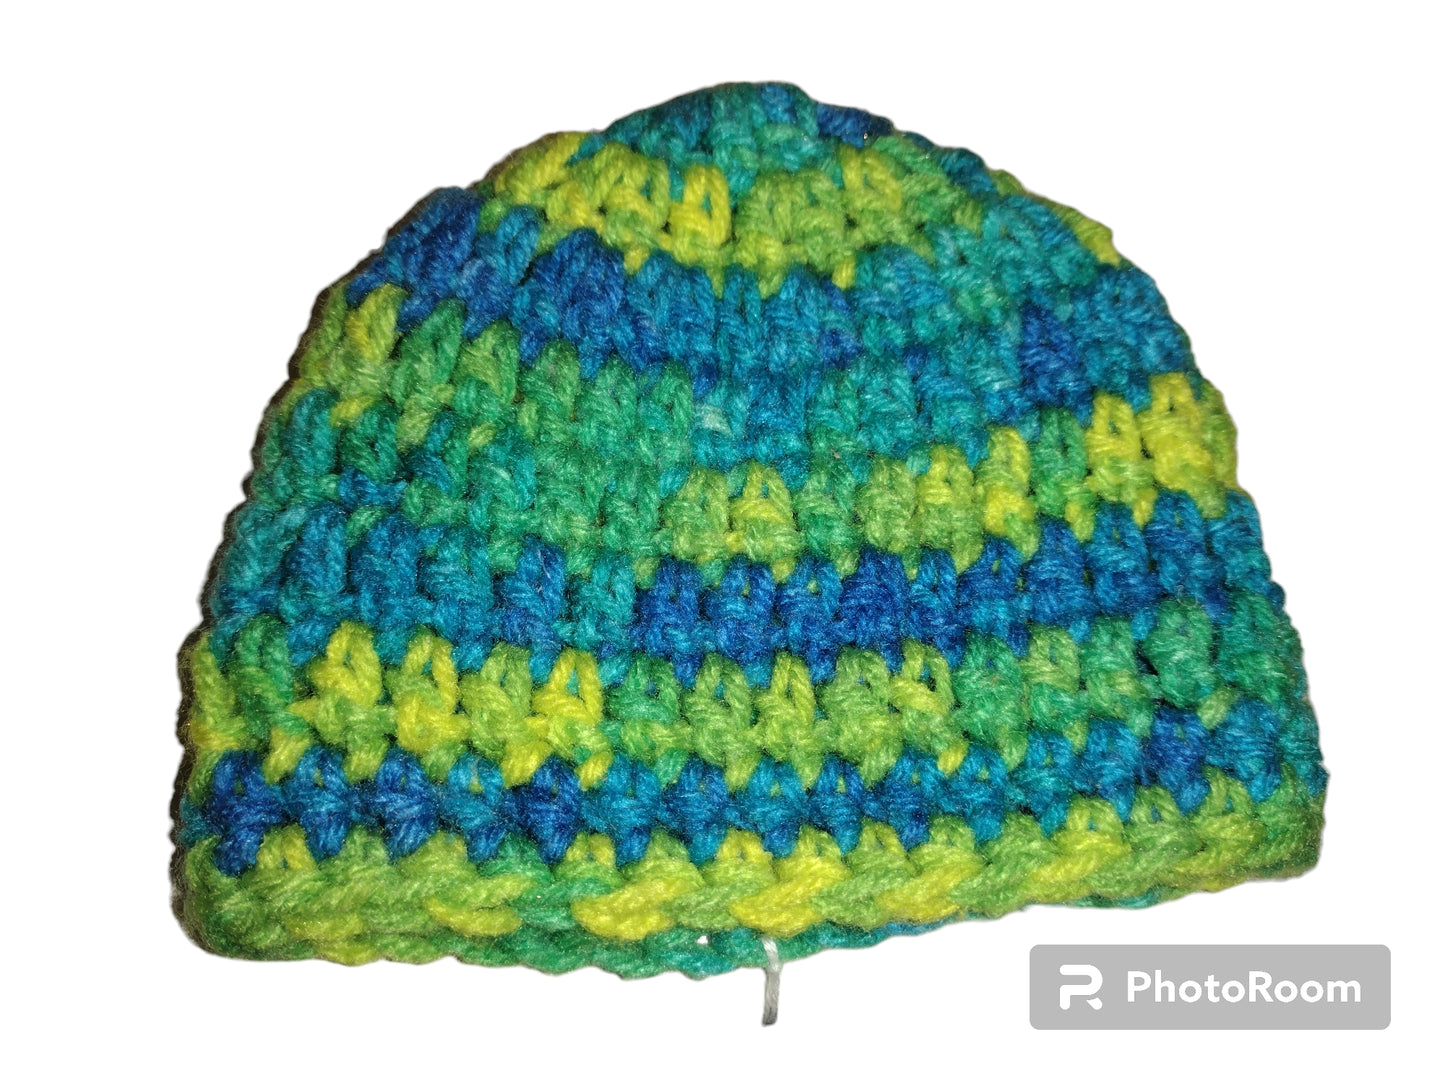 Multicolored baby hat